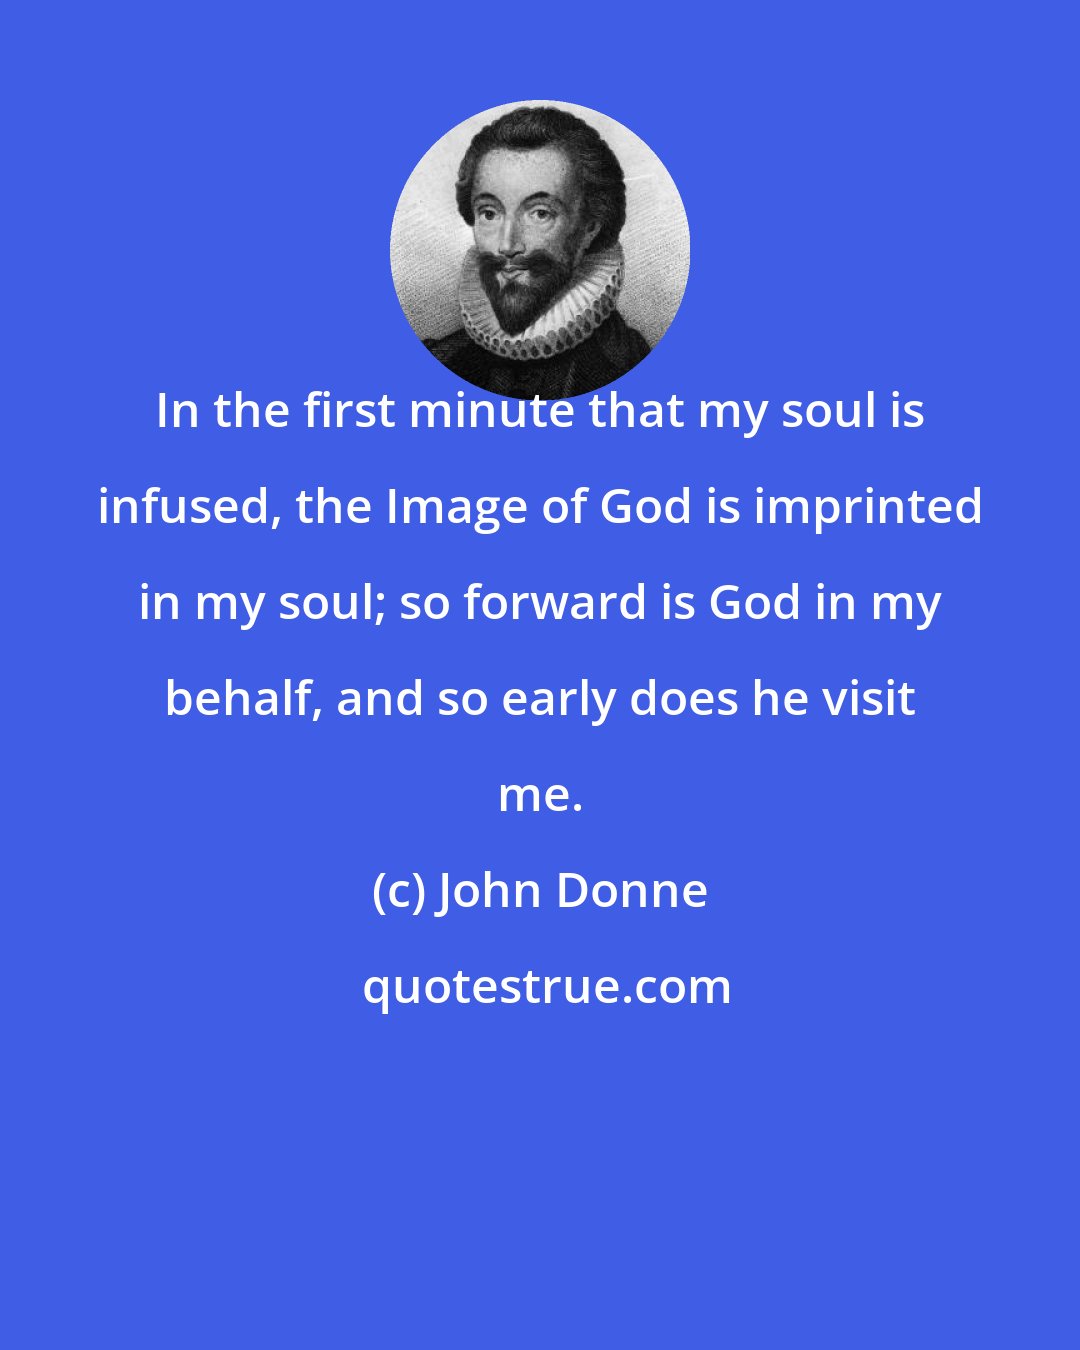 John Donne: In the first minute that my soul is infused, the Image of God is imprinted in my soul; so forward is God in my behalf, and so early does he visit me.